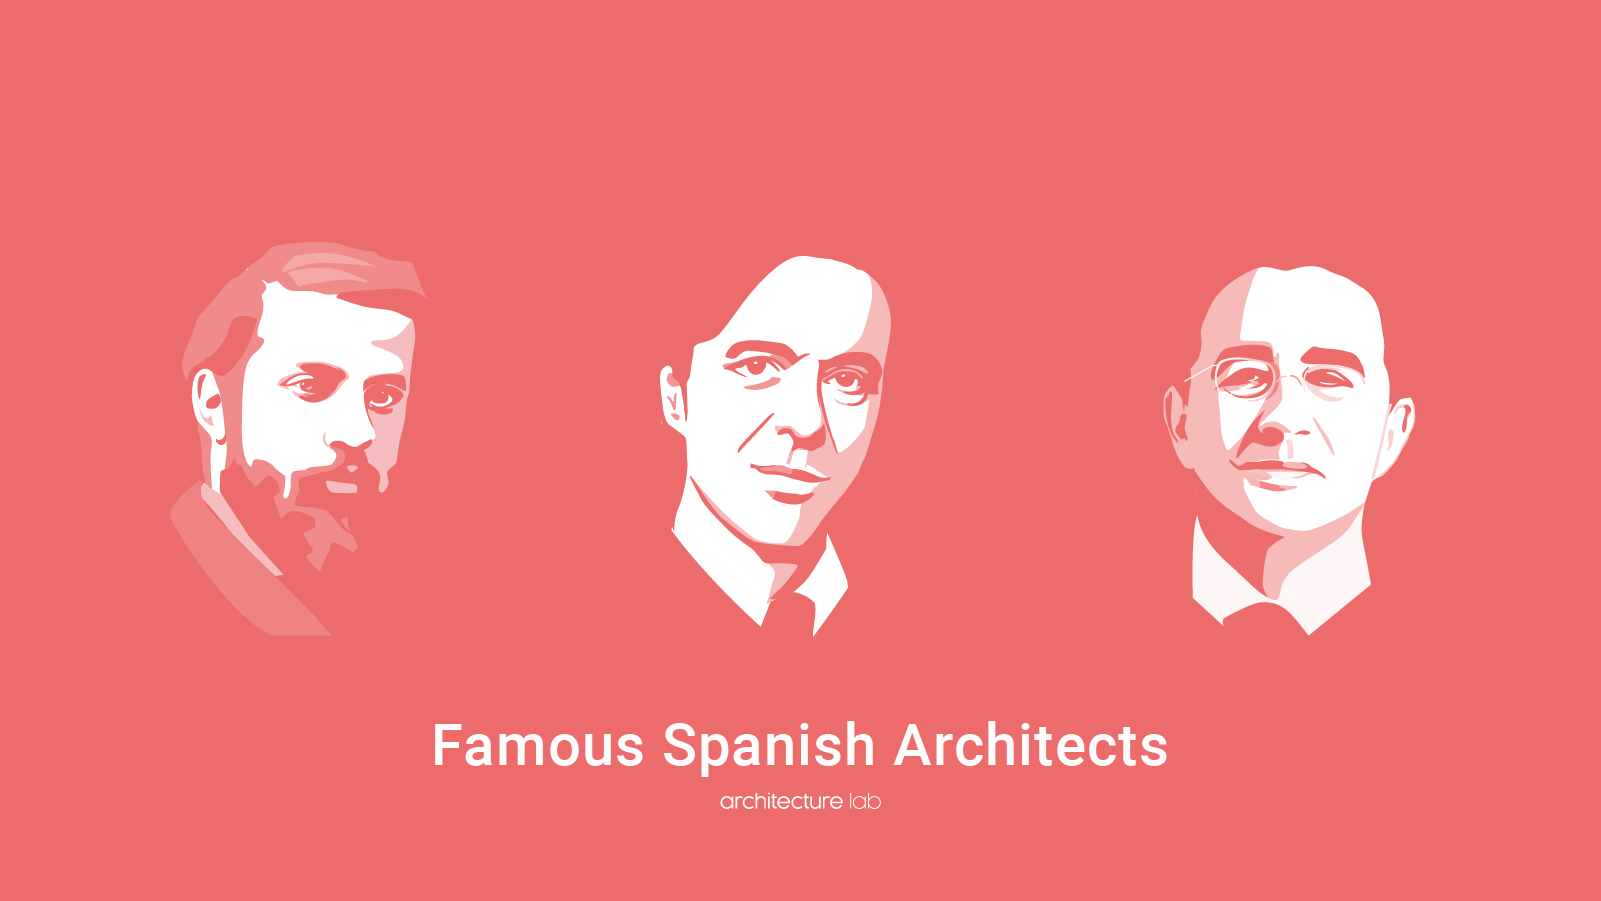 21 famous spanish architects and their proud works